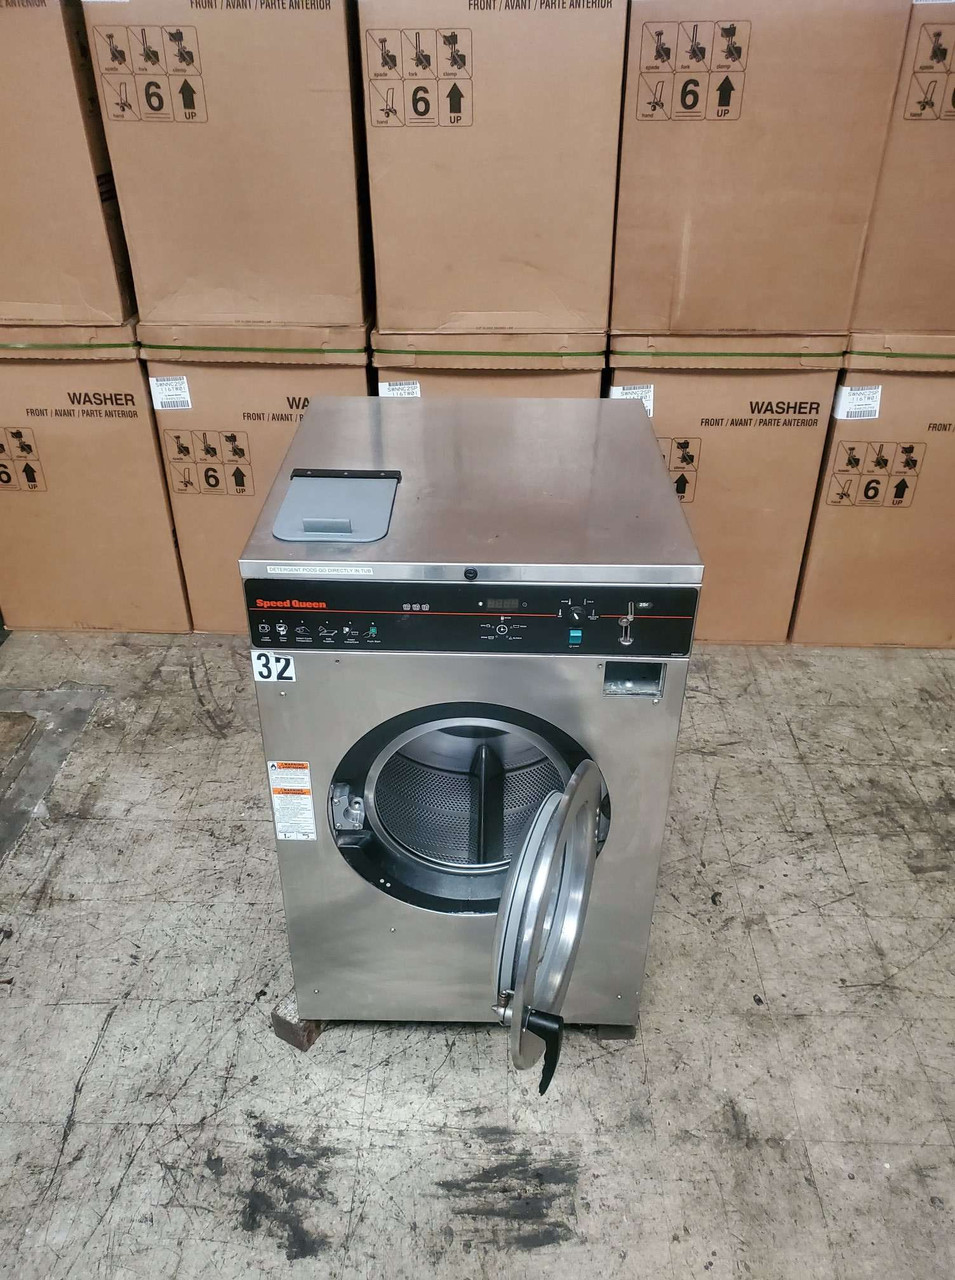 Speed Queen Commercial Front Load Washing Machine, Quantum Gold Control,  MODEL:SFNNCRSP116TW01 - 123 Laundry Solutions